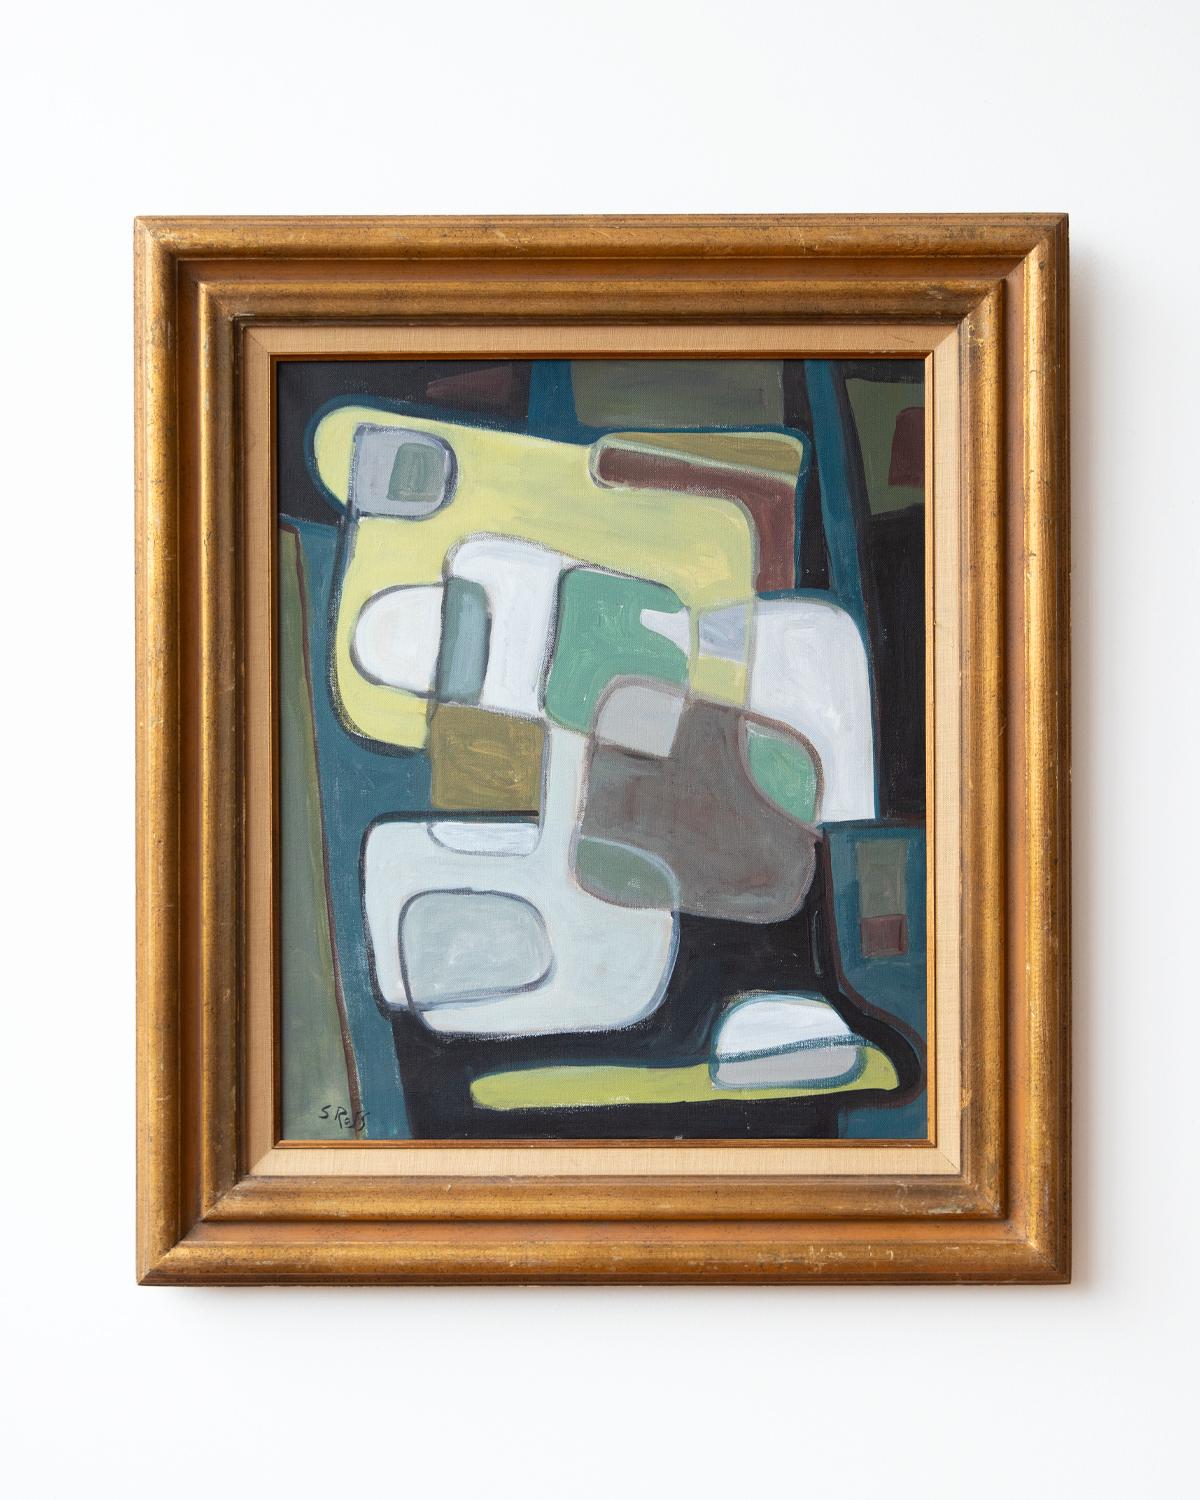 Abstract No. 52 has a neutral palette of green and white. The rounded forms seem to stack and intertwine. The vintage gold frame was chosen by the artist.

Dimensions
+ Framed: 33